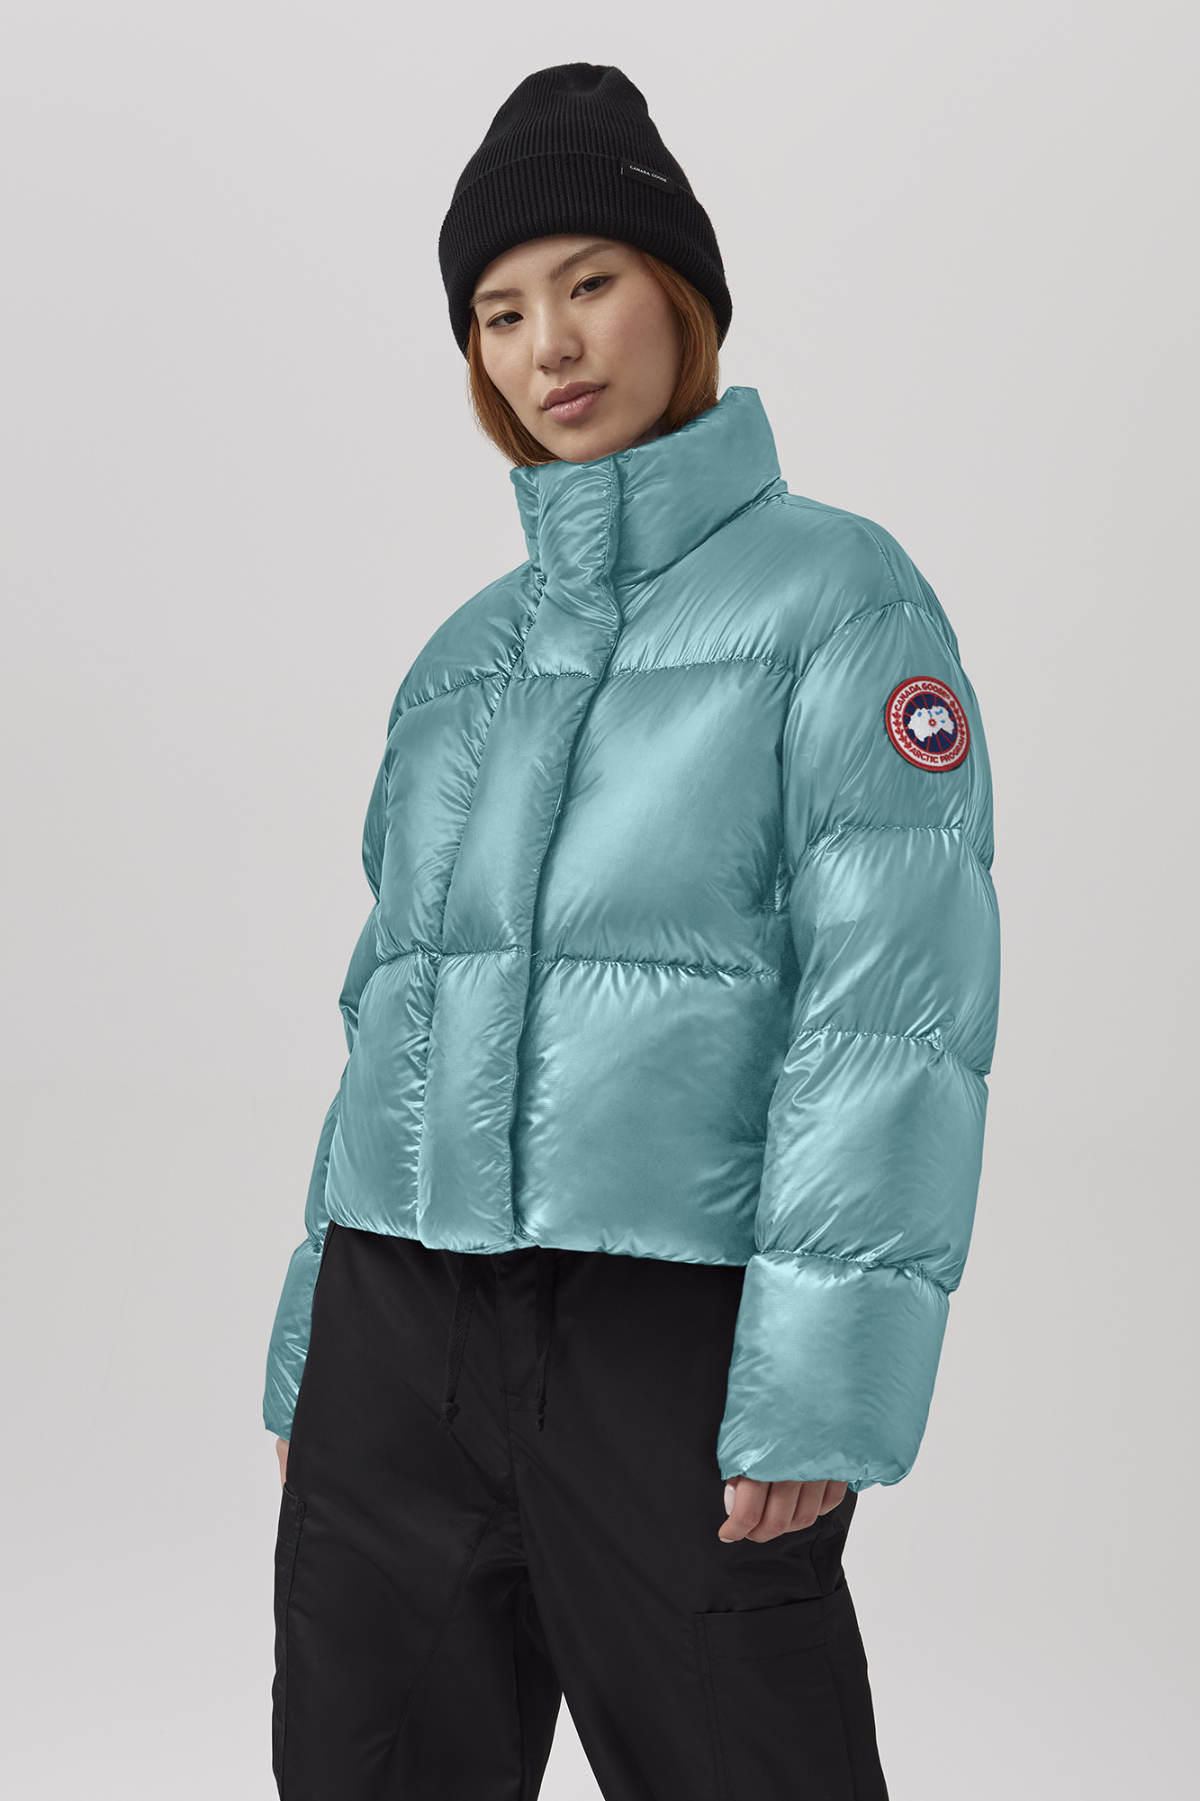 Cypress cropped puffer jacket in blue - Canada Goose